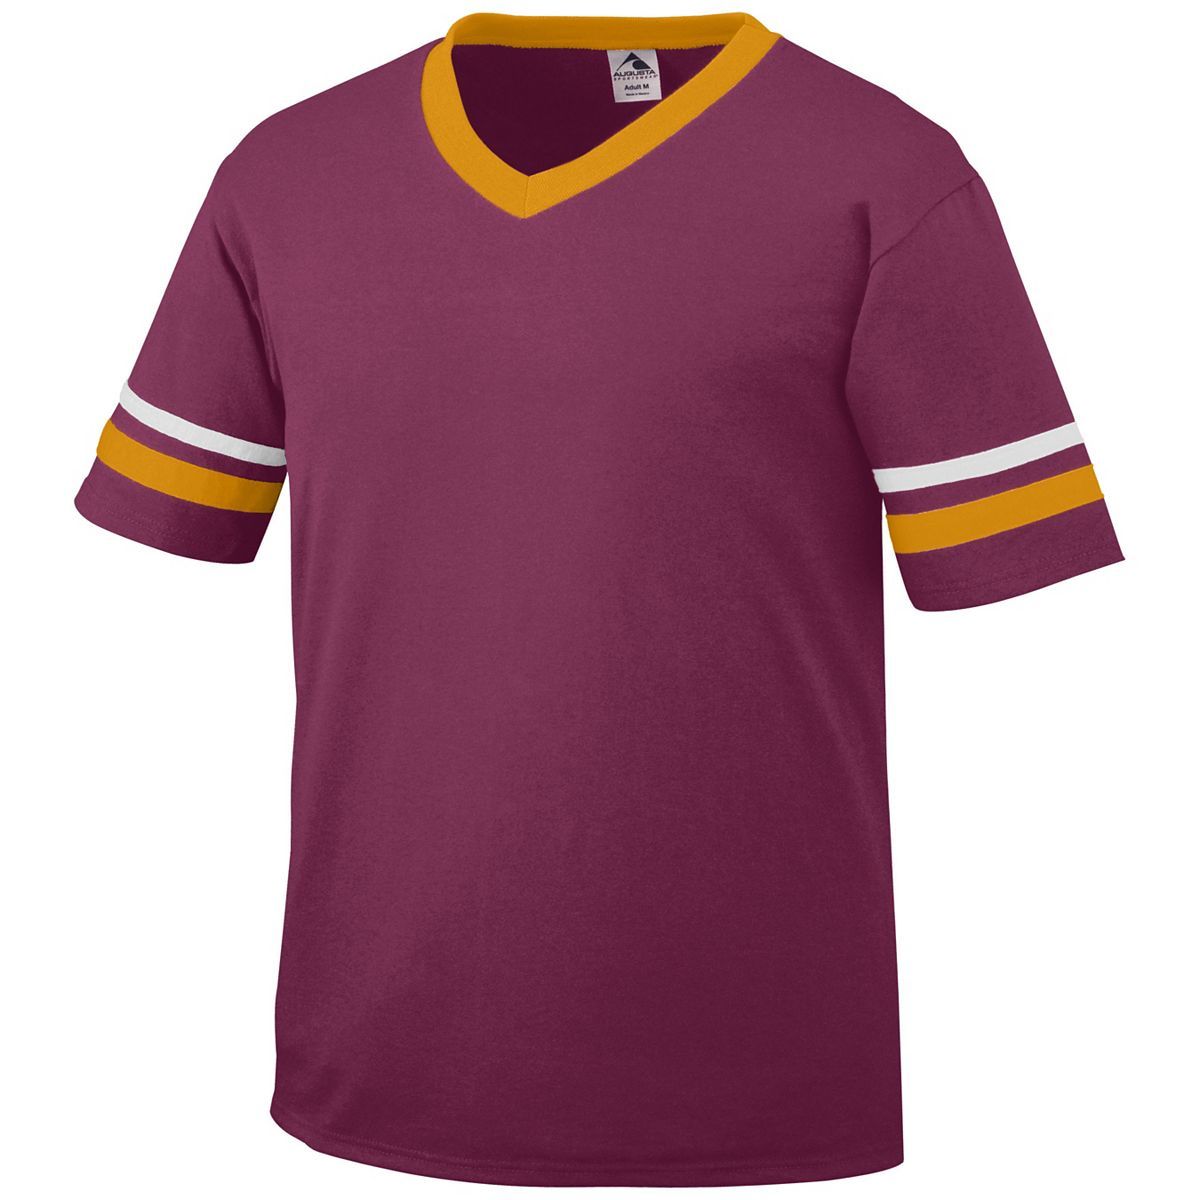 Augusta Sportswear Youth Sleeve Stripe Jersey in Maroon/Gold/White  -Part of the Youth, Youth-Jersey, Augusta-Products, Shirts product lines at KanaleyCreations.com